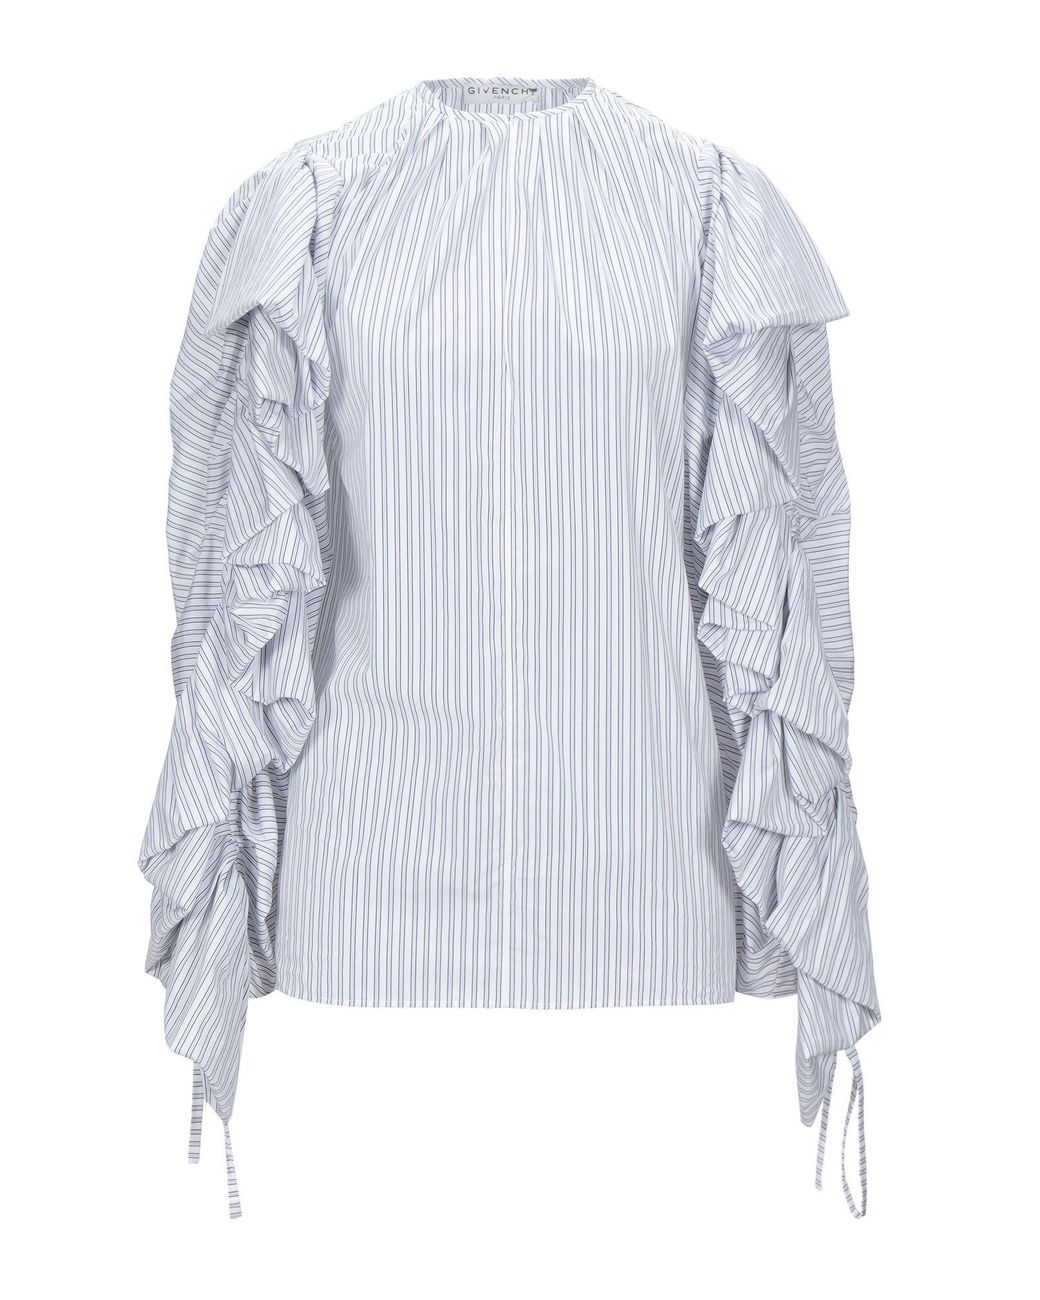 Givenchy Cotton Blouse in White - Lyst